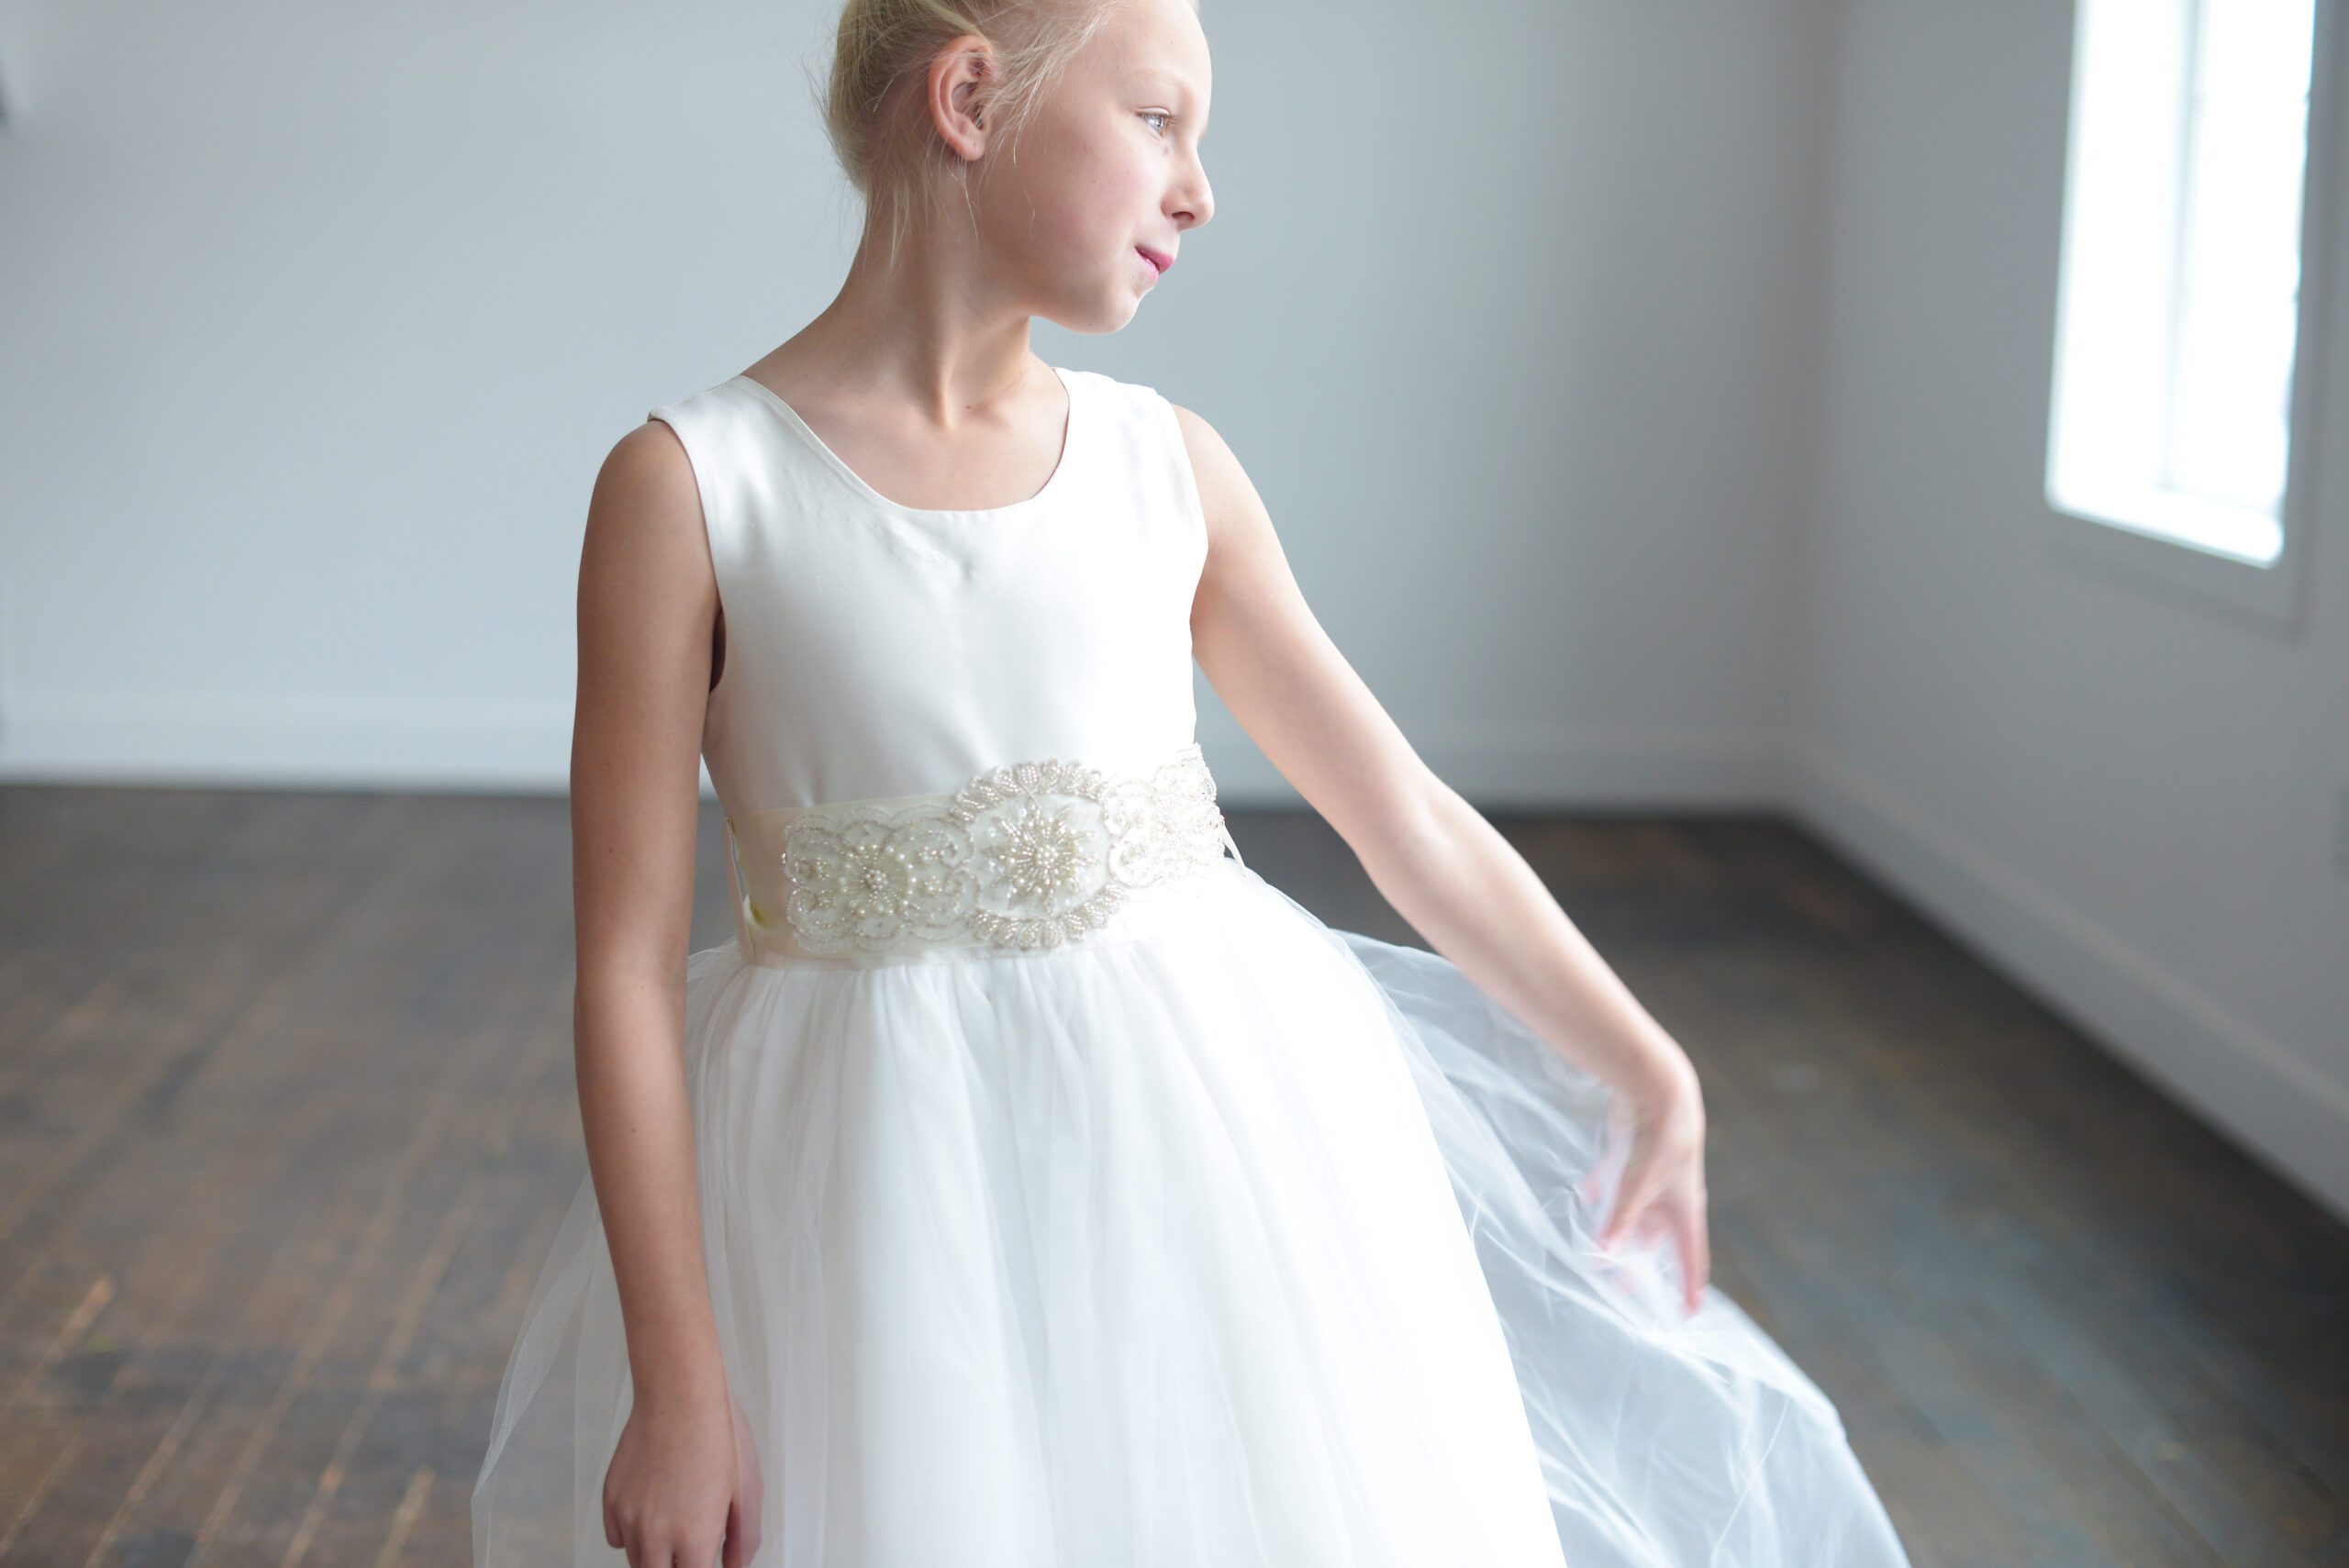 A photo of a white satin flower girl dress with a full ballerina style skirt in tulle and a diamante motif.